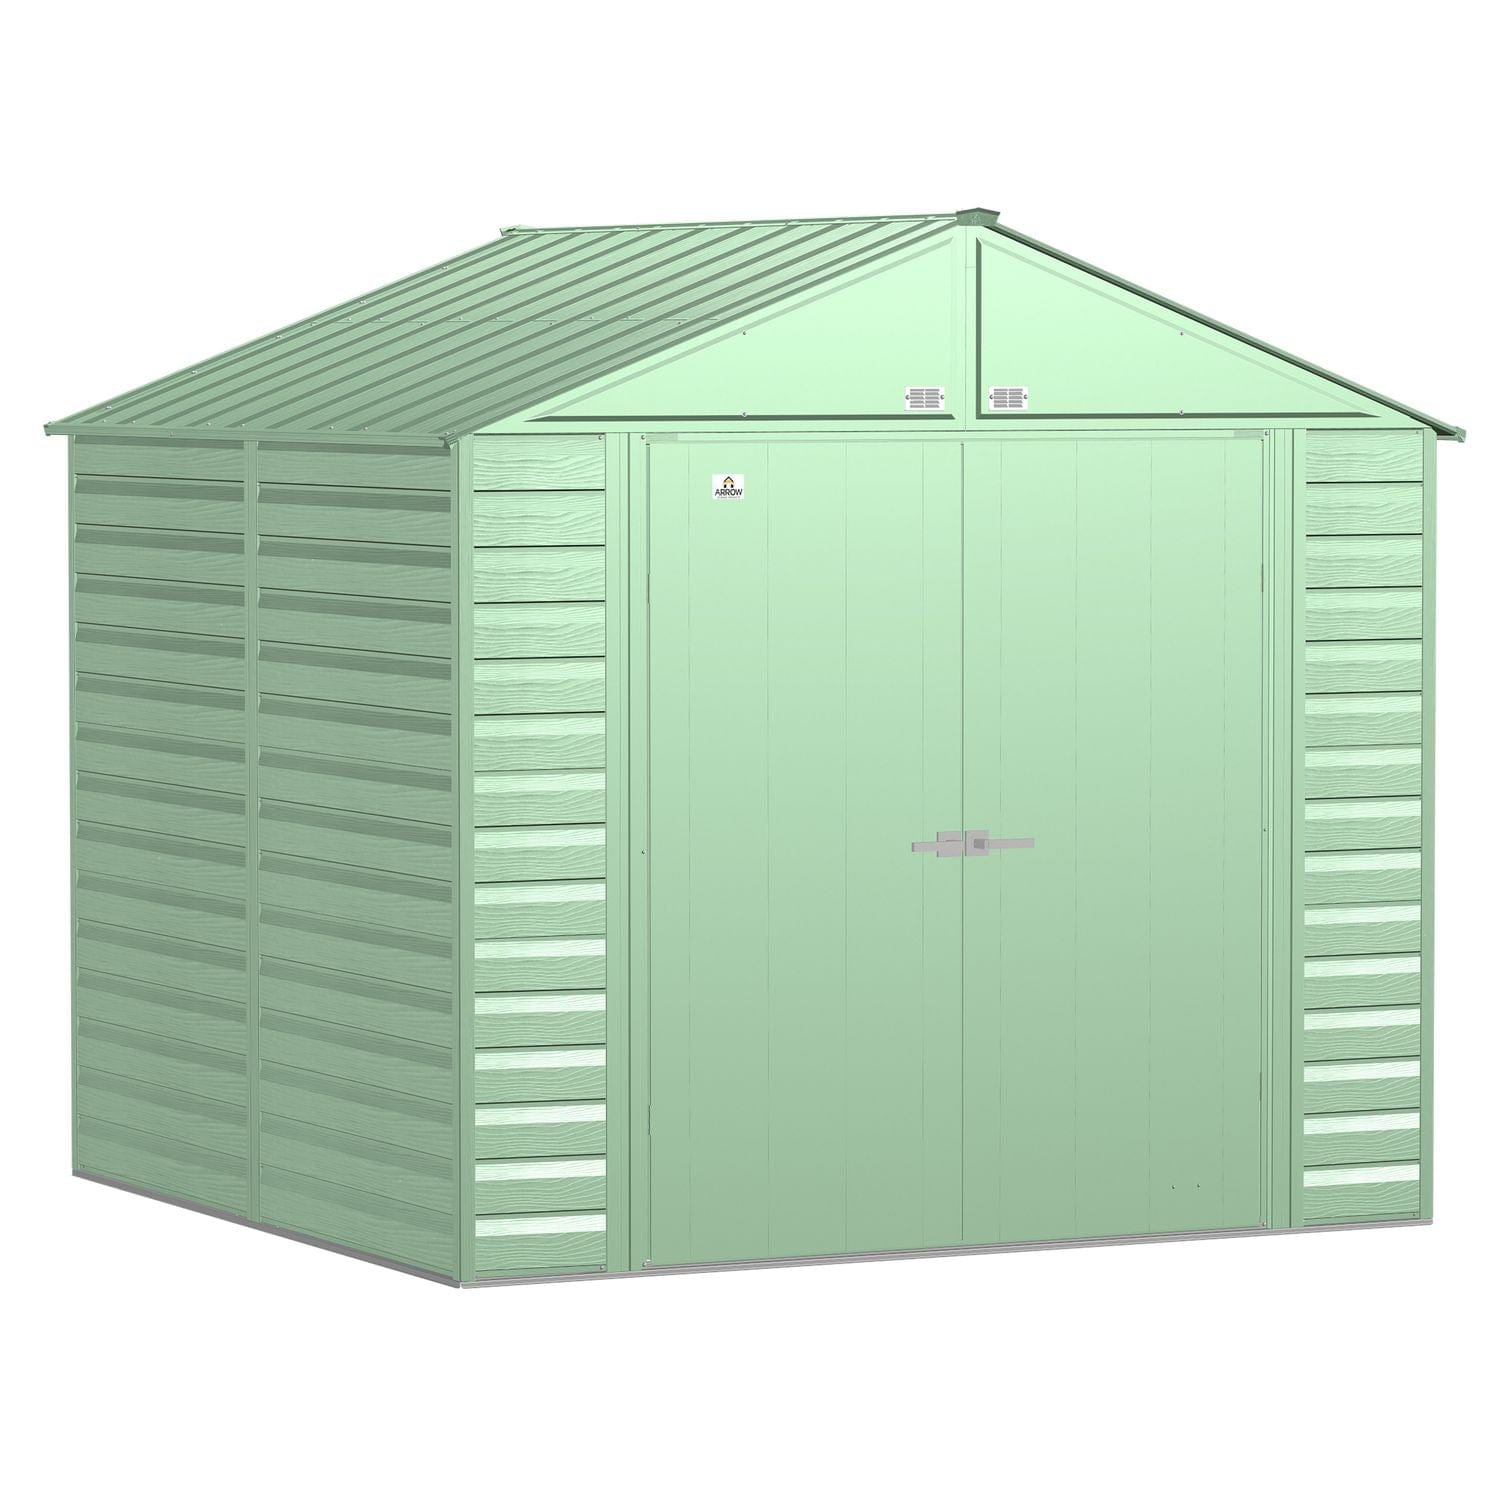 Arrow Sheds & Storage Buildings Arrow | Select Gable Roof Steel Storage Shed, 8x8 ft., Sage Green SCG88SG